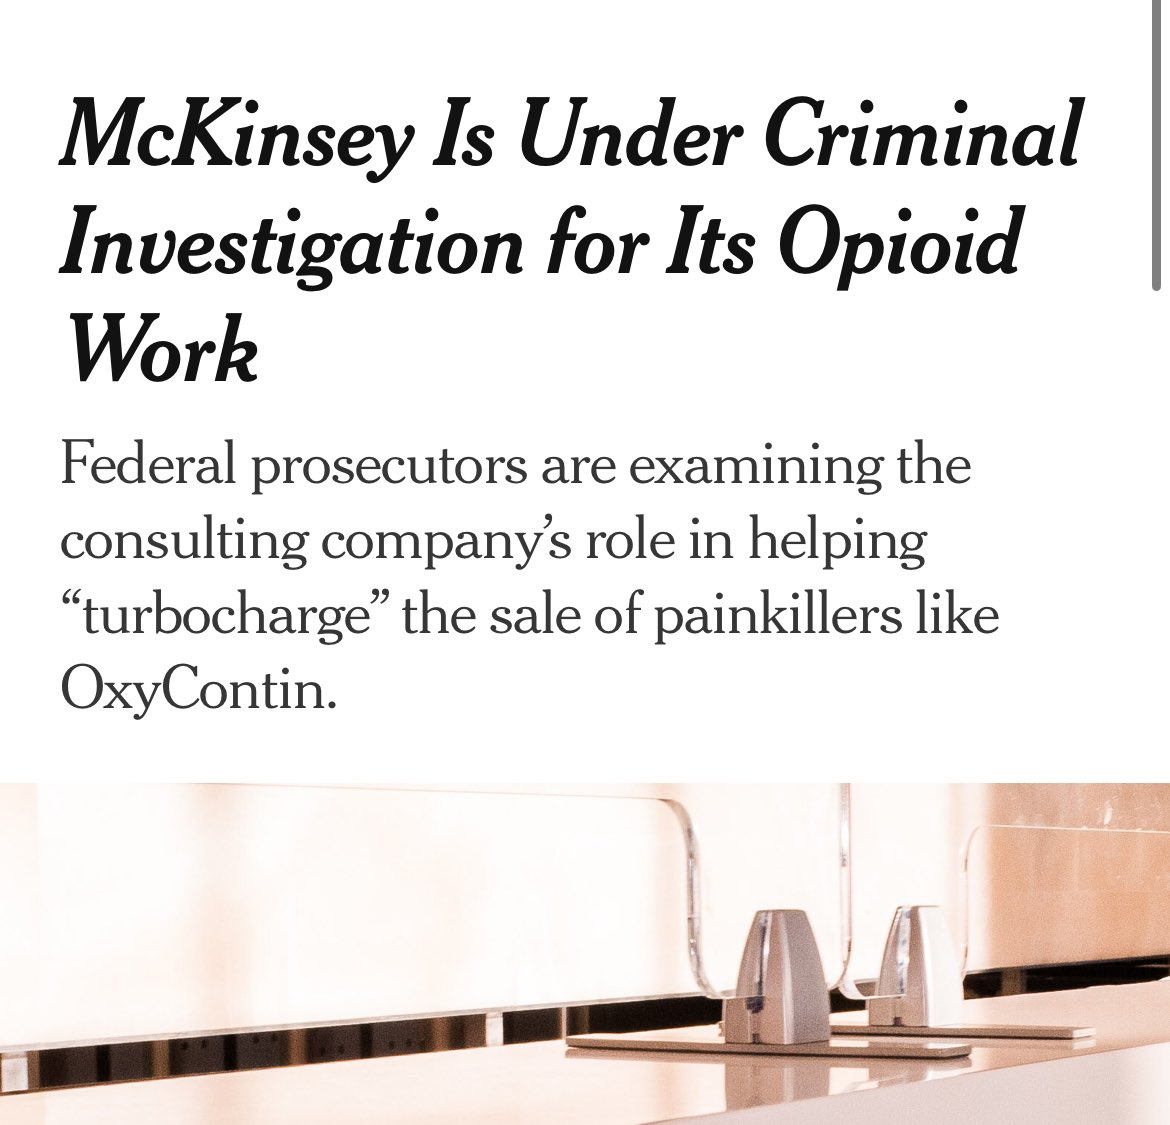 The reporters who literally wrote to book on McKinsey’s secretive efforts to fuel the opioid market, @PekingMike and @waltbogdanich, plus @GlennThrush report for @nytimes that the consulting giant is under criminal investigation.